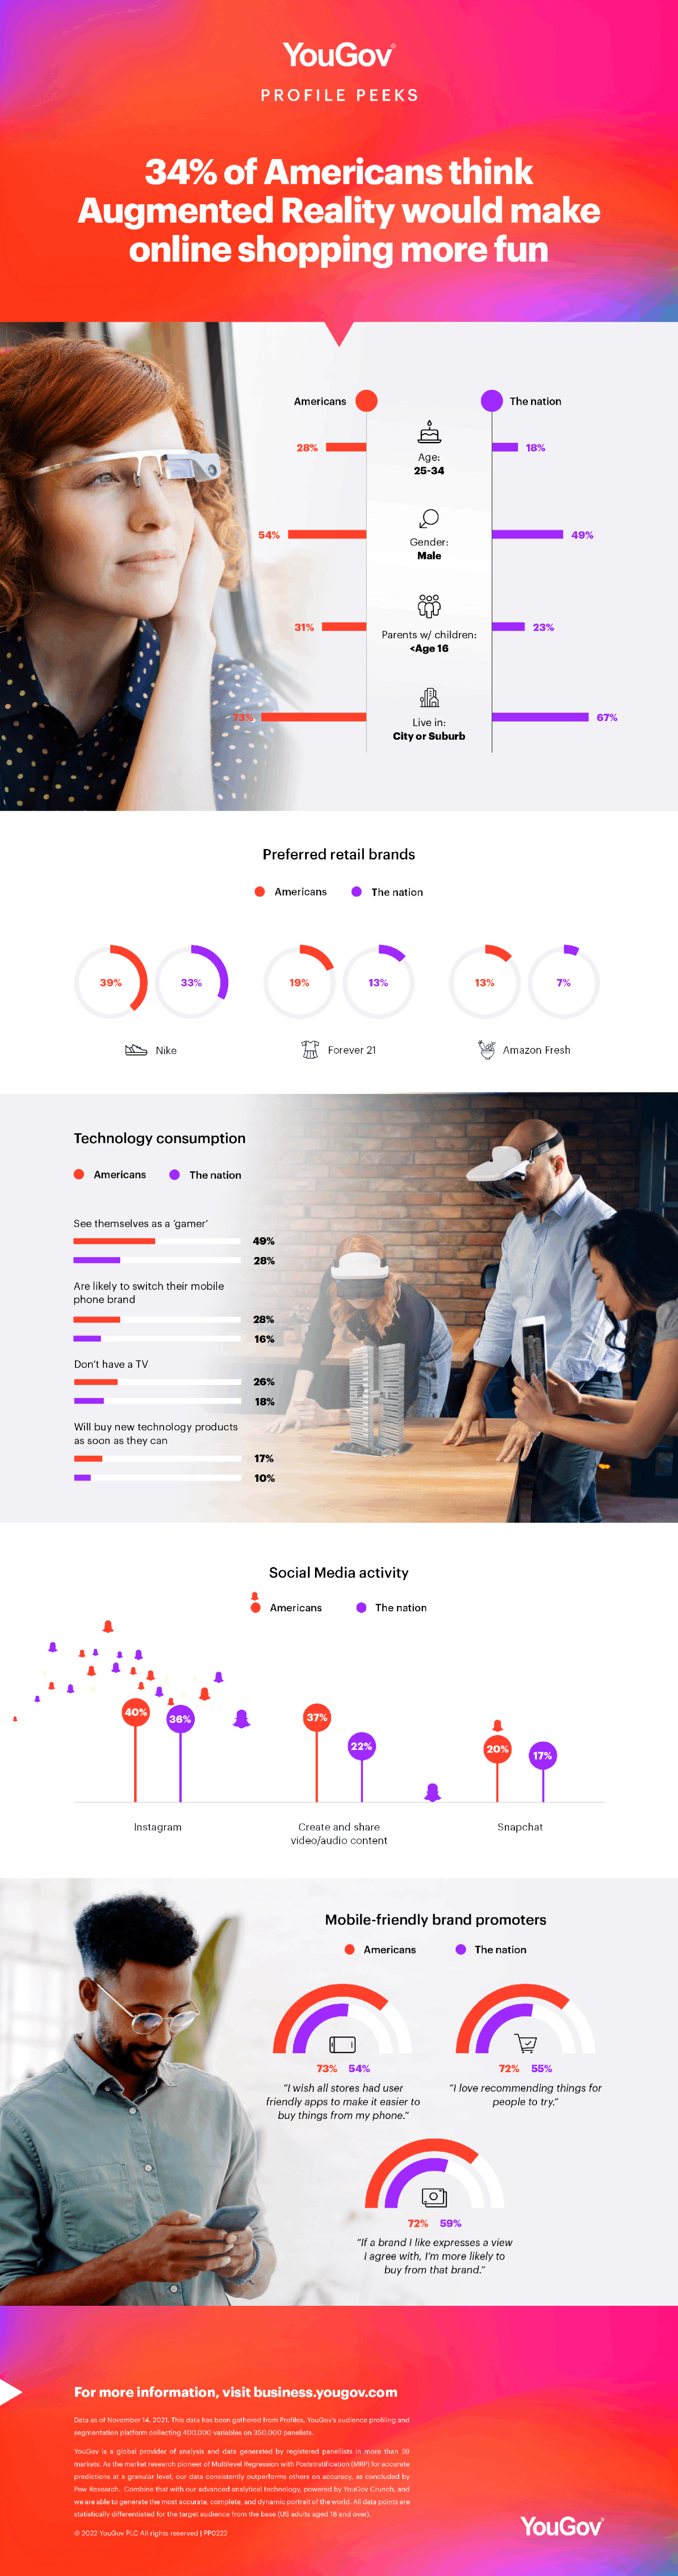 34% of Americans Want Augmented Reality Online Shopping, Here's Who They Are